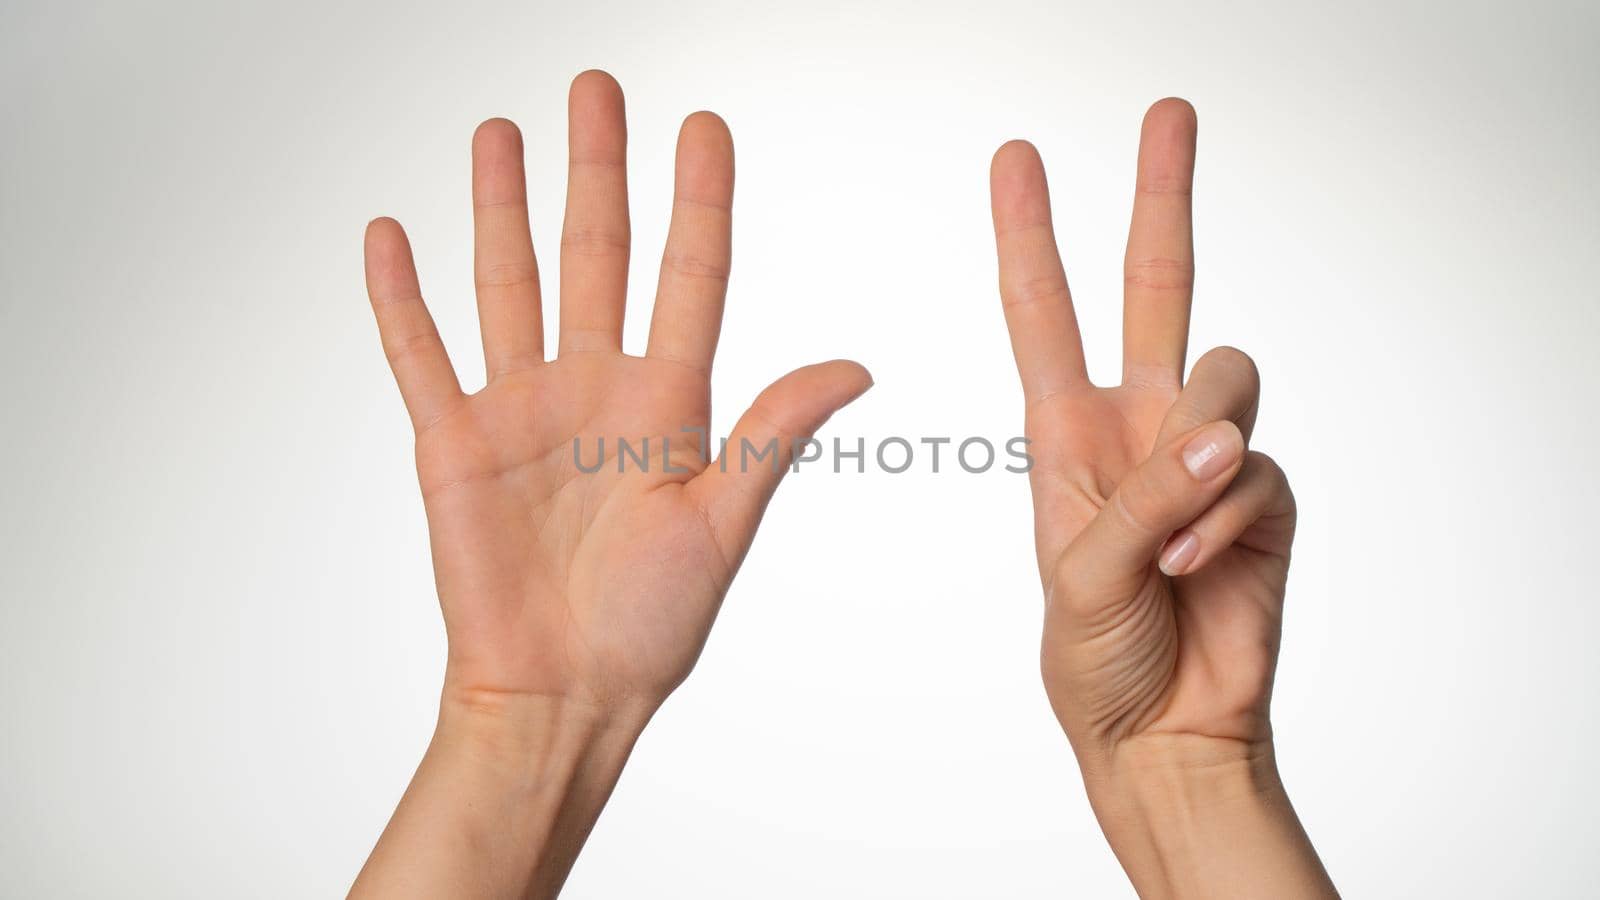 Women's hands gesture counting on fingers seven palm side by voktybre